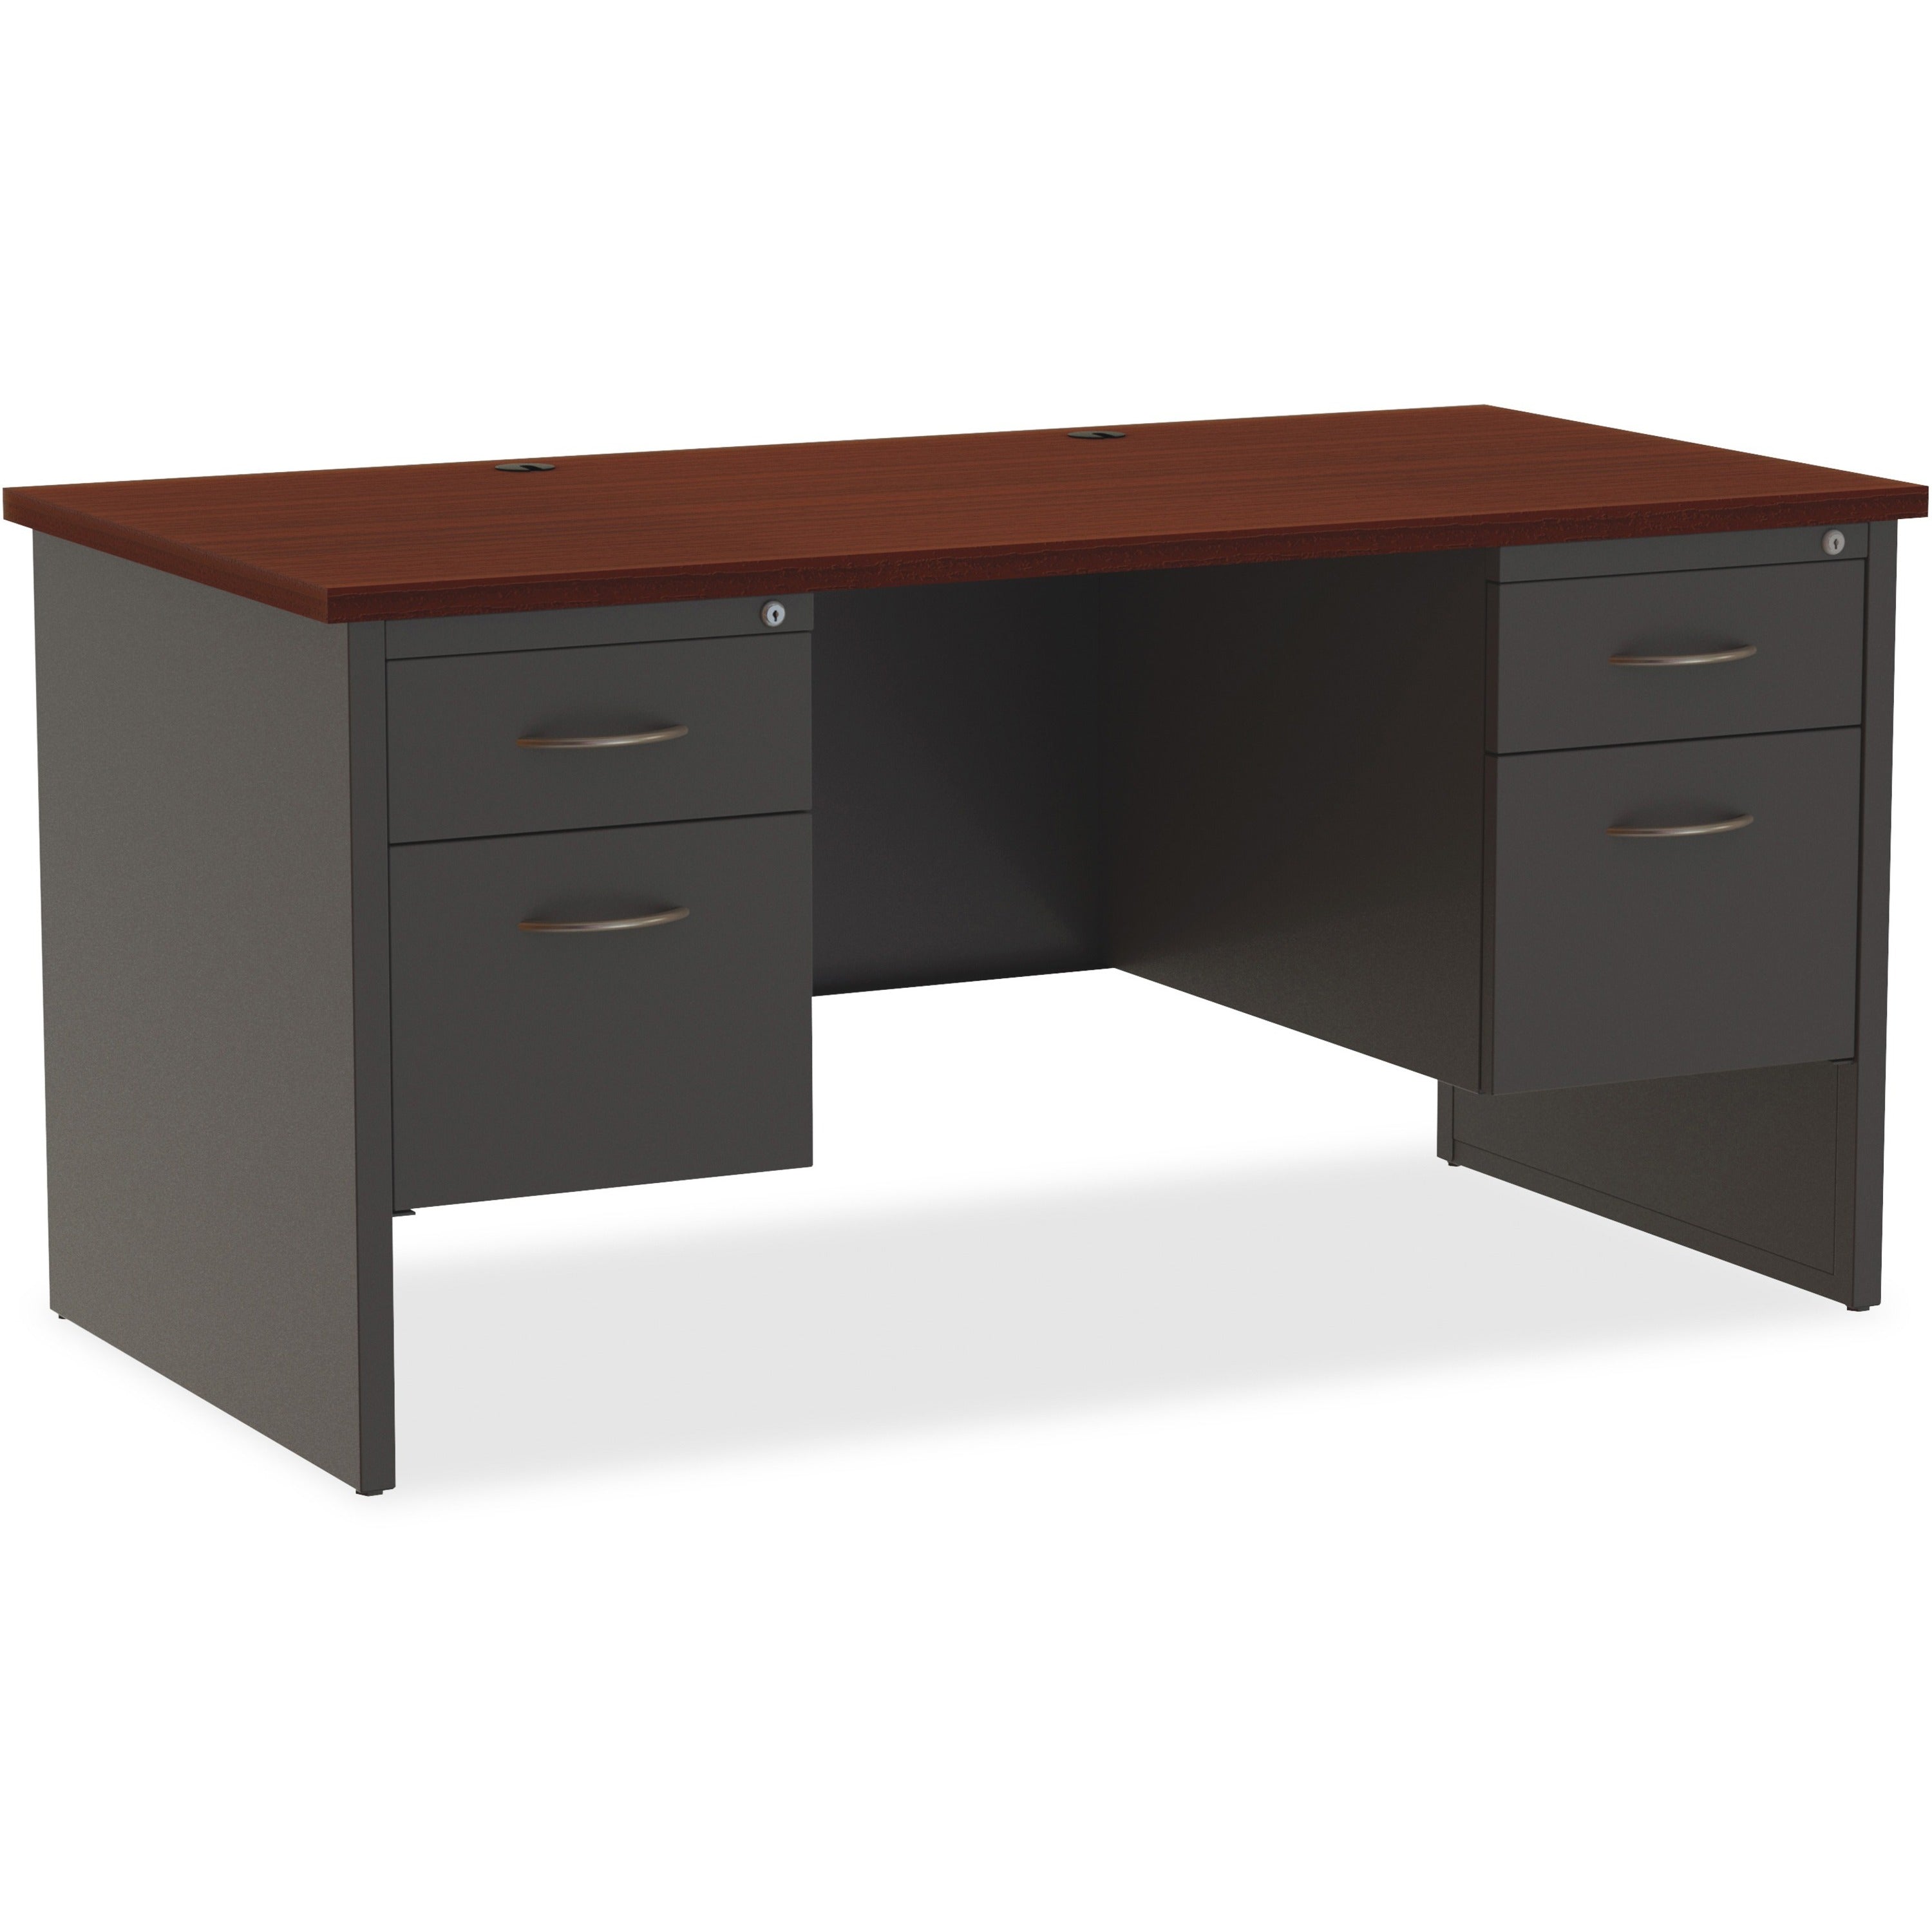 Lorell Fortress Modular Series Double-Pedestal Desk - 60" x 30" , 1.1" Top - 2 x Box, File Drawer(s) - Double Pedestal - Material: Steel - Finish: Mahogany Laminate, Charcoal - Scratch Resistant, Stain Resistant, Ball-bearing Suspension, Grommet, Han - 